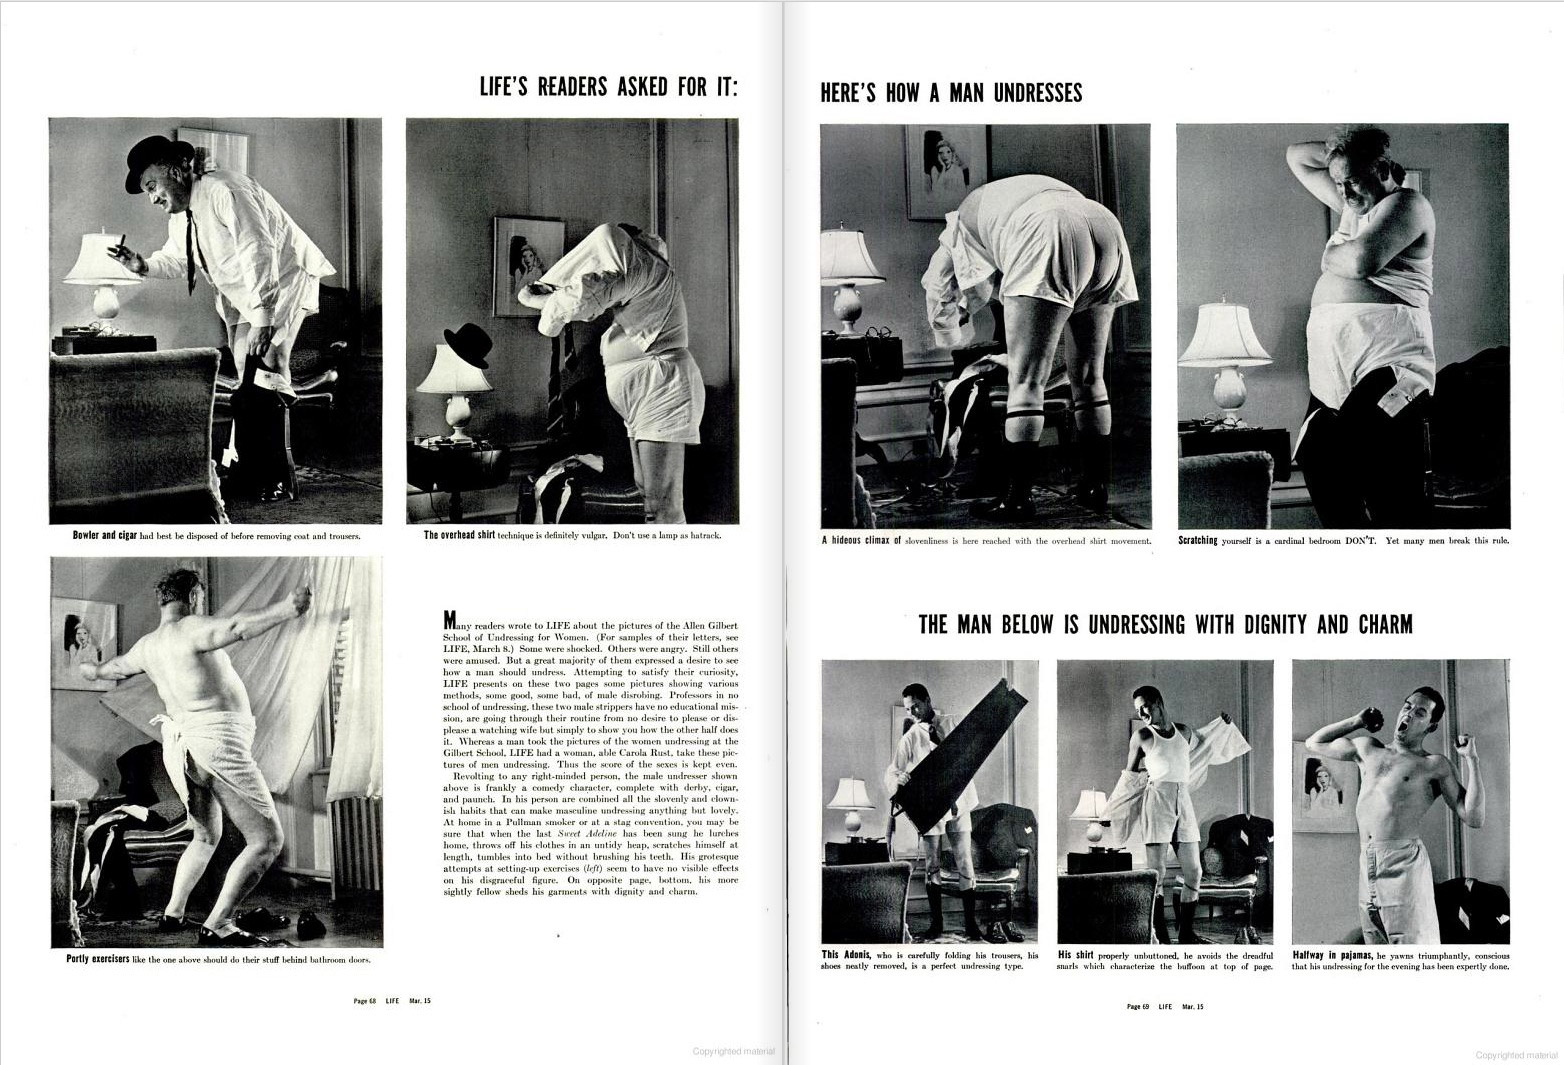 From the March 15, 1937 issue of LIFE magazine. Photos by Carola Rust.